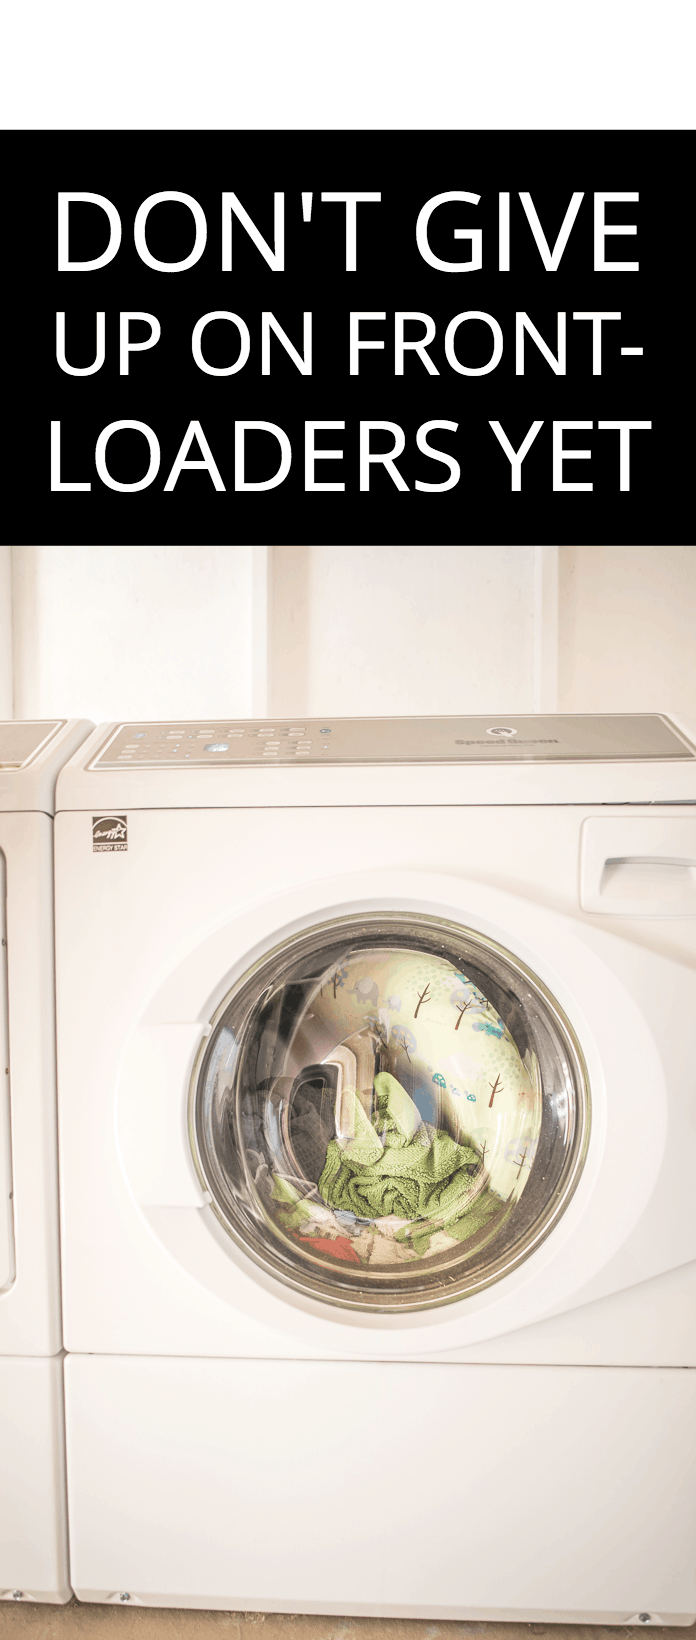 Here are a few things you should know about front-loaders before you switch back to top-load washing machines.